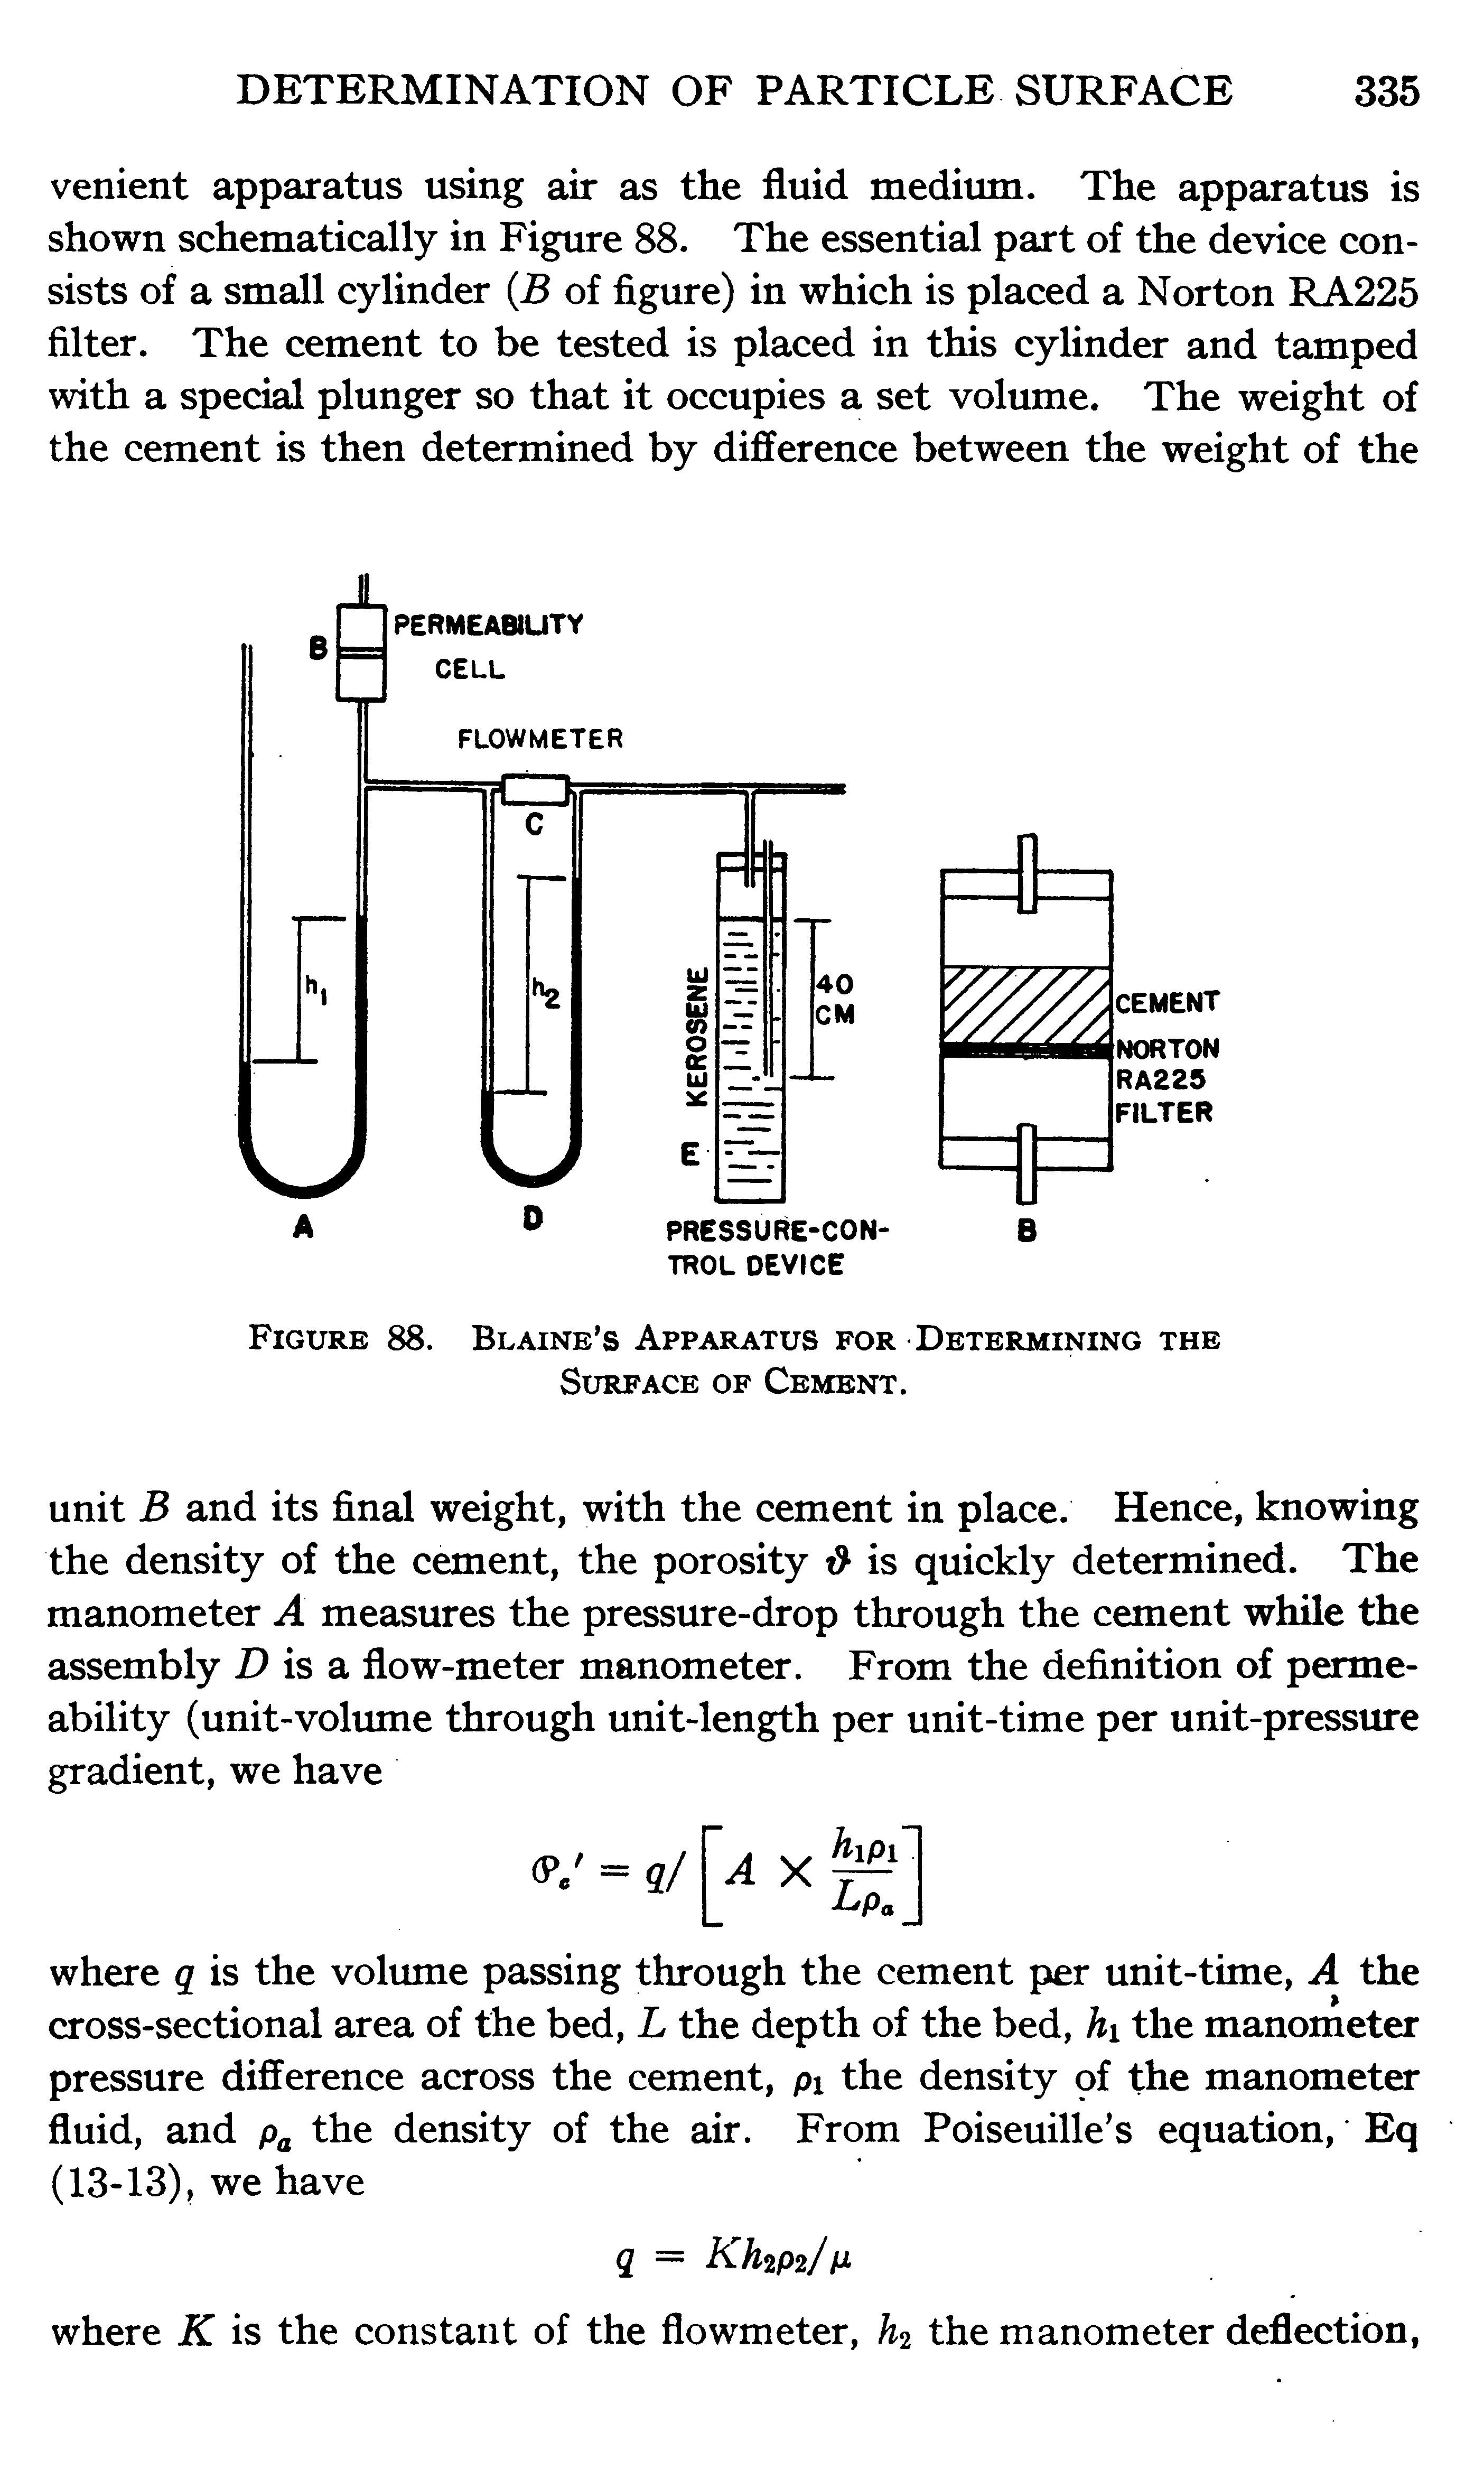 Figure 88. Blaine s Apparatus for Determining the Surface of Cement.